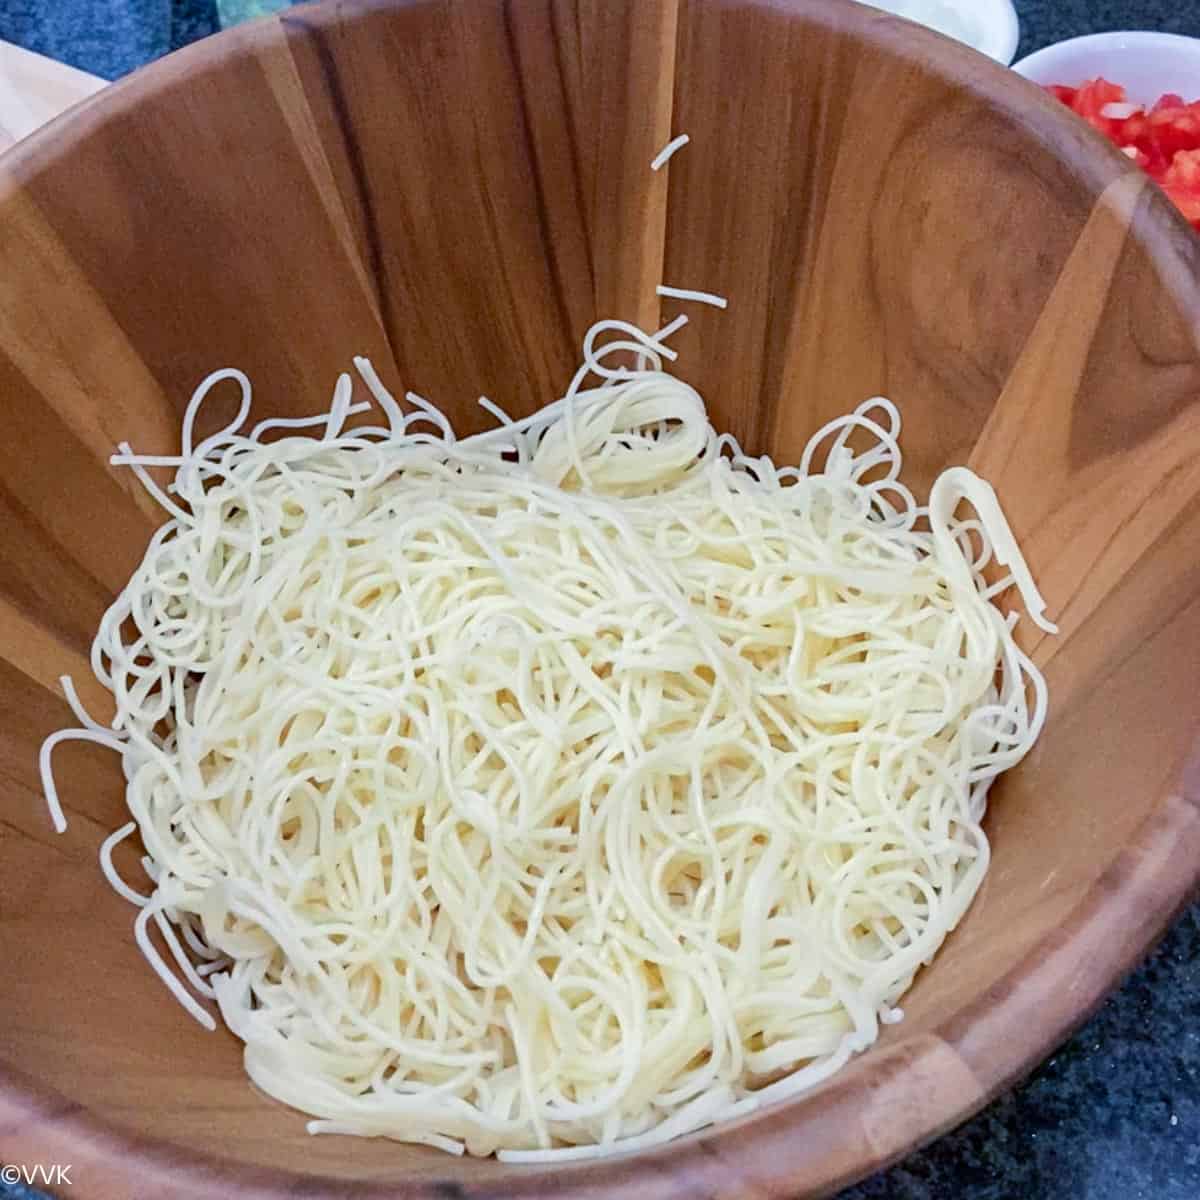 cooked pasta